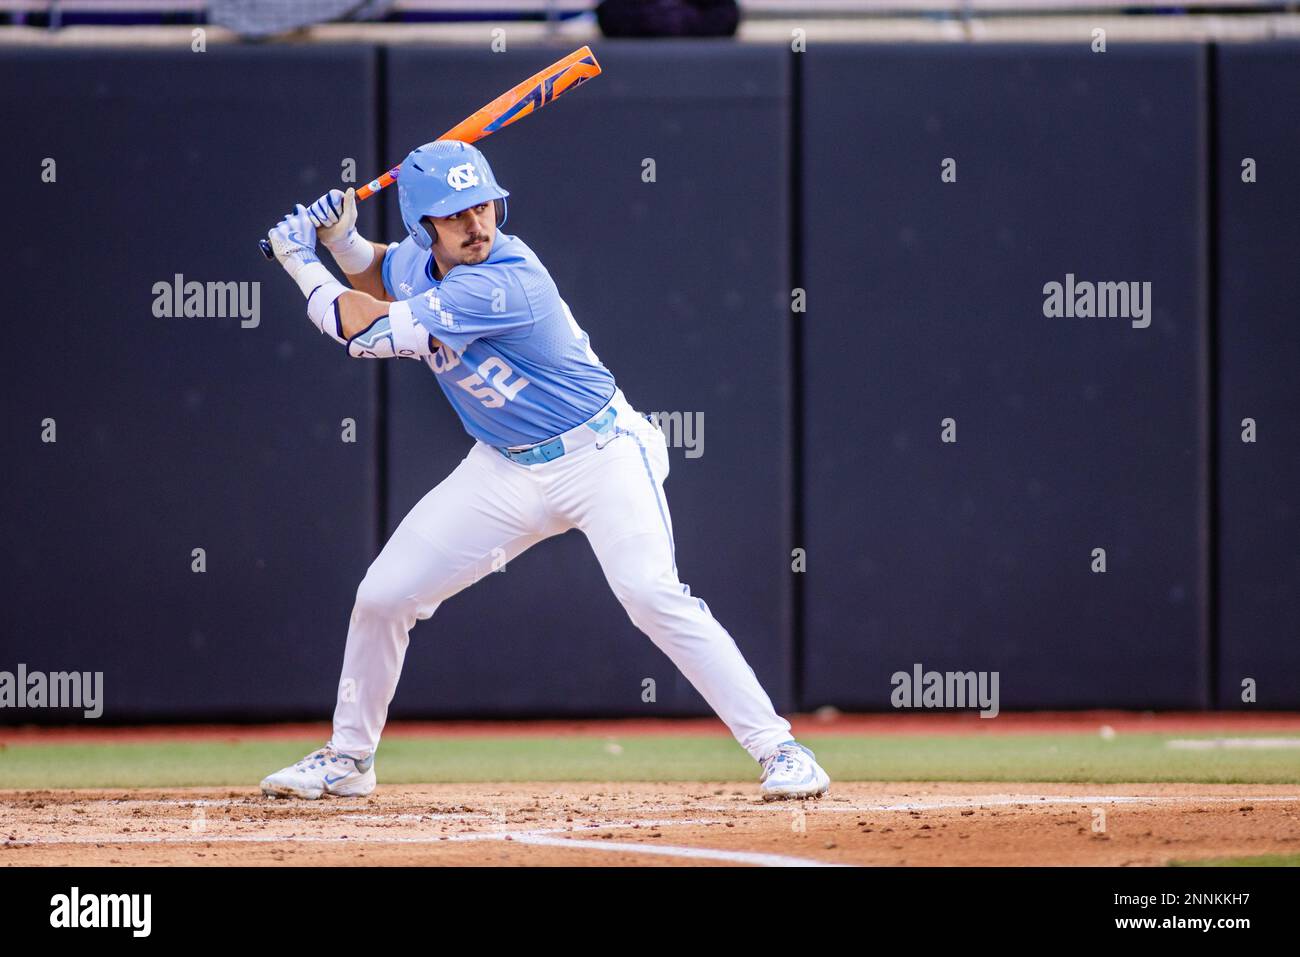 Greenville, NC, USA. 24th Feb, 2023. North Carolina Tar Heels catcher Tomas Frick (52) at bat during the second inning against the East Carolina Pirates in the NCAA Baseball matchup at Clark LeClair Stadium in Greenville, NC. (Scott Kinser). Credit: csm/Alamy Live News Stock Photo